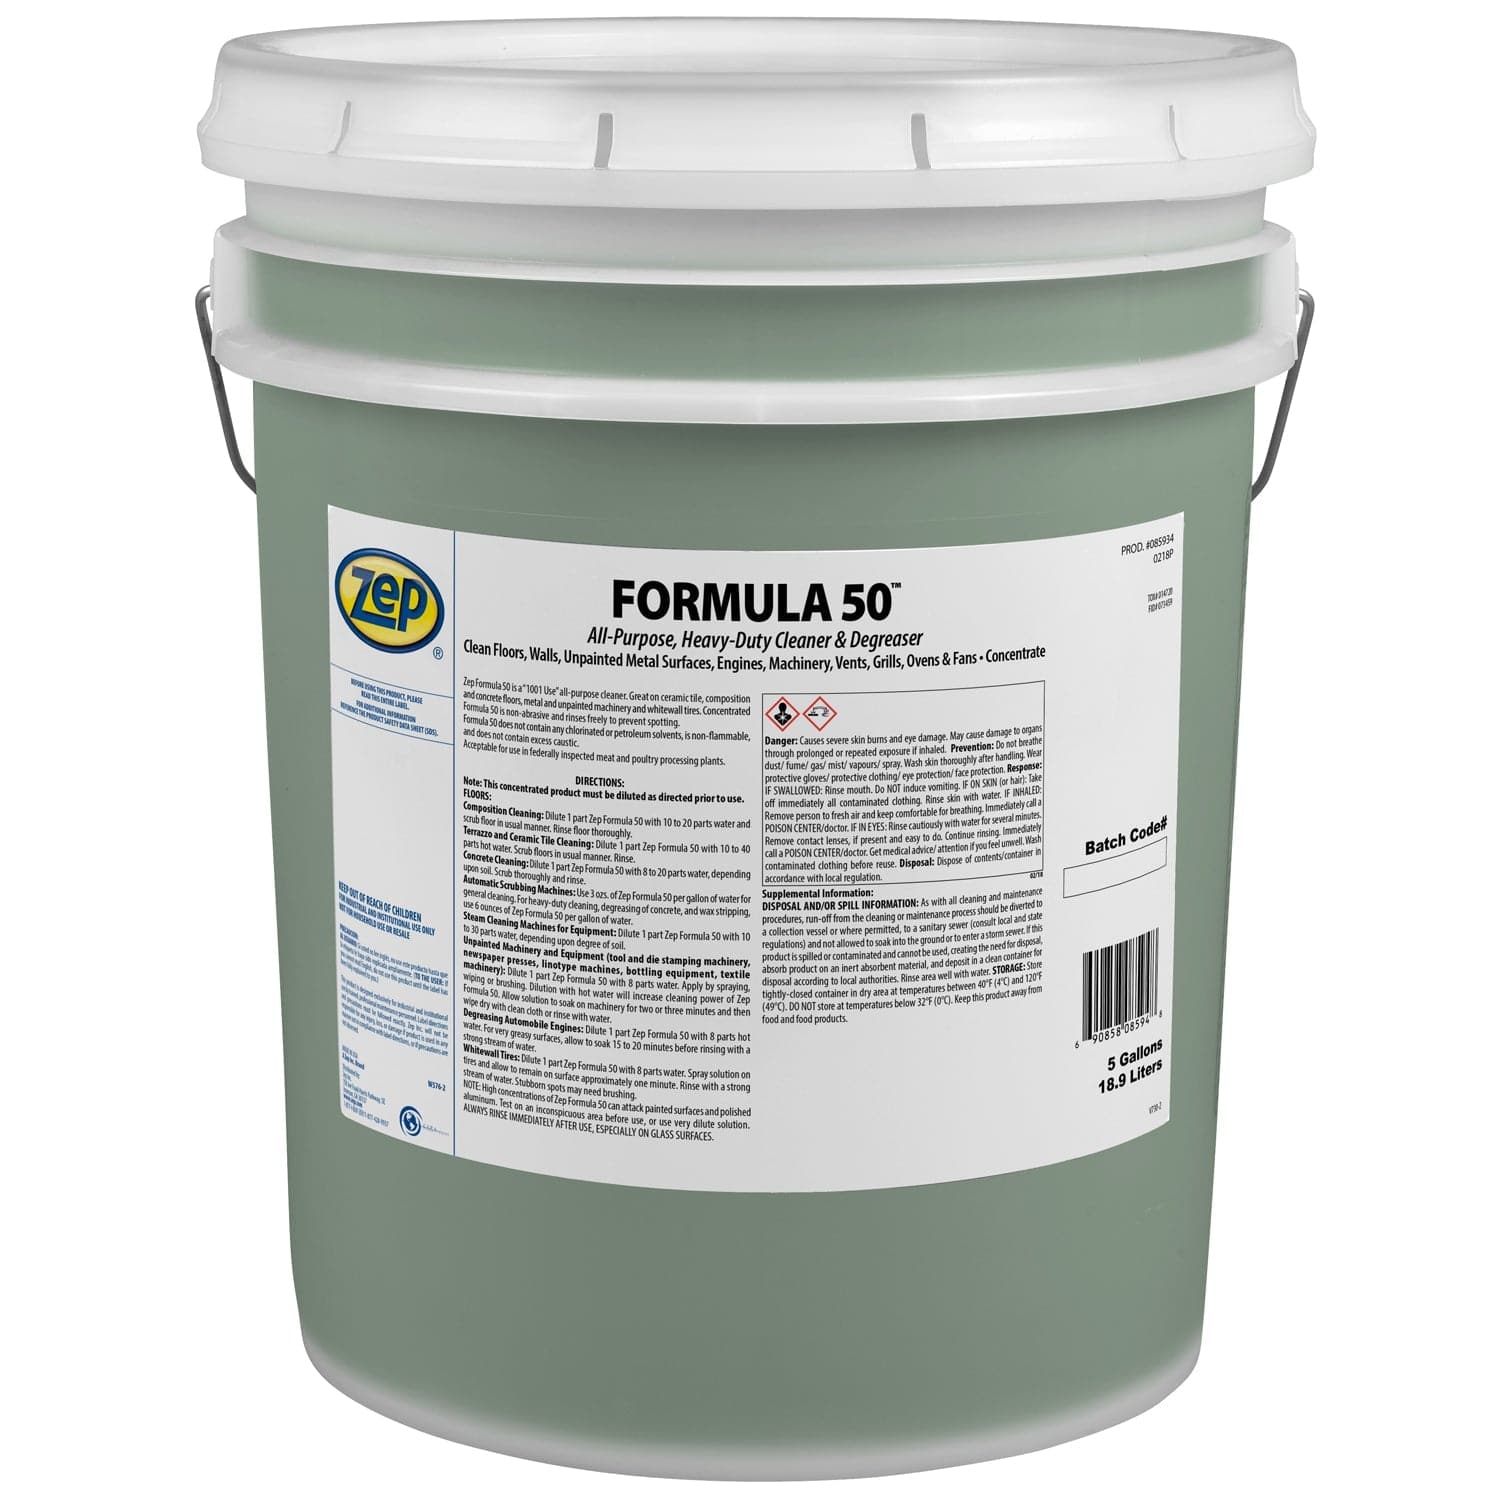 Image for Formula 50 All-Purpose Heavy-Duty Cleaner & Degreaser - 5 Gallon